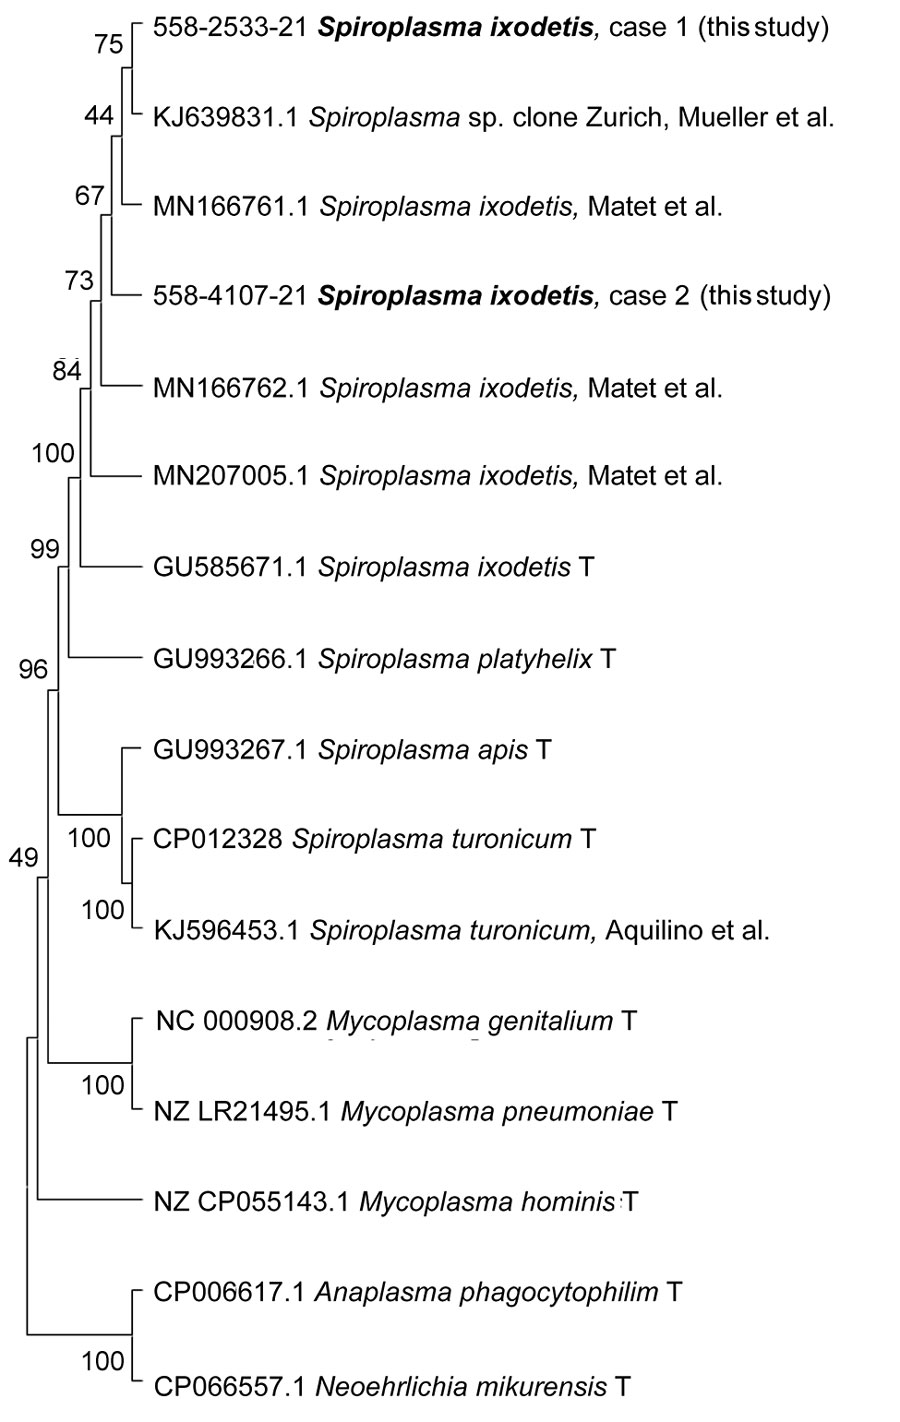 Spiroplasma ixodetis infections in immunocompetent and immunosuppressed patients after tick exposure, Sweden. Neighbor-joining tree based on partial 16S rRNA sequences of clinical isolates of Spiroplasma spp., other members of the family Mollicutes (Mycoplasma spp.), and tickborne bacterial pathogens of the family Anaplasmataceae (Anaplasma phagocytophilum and Neoehrlichia mikurensis). Type strains are indicated by T, and clinical samples from this study are indicated in bold. Percentage values of replicate trees in which the associated taxa clustered together in the bootstrap test (1,000 replicates) are shown next to the branches. Evolutionary distances were computed by using the Kimura 2-parameter method and are in the units of number of base substitutions per site. Evolutionary analyses were conducted by using MEGA11 (https://www.megasoftware.net).